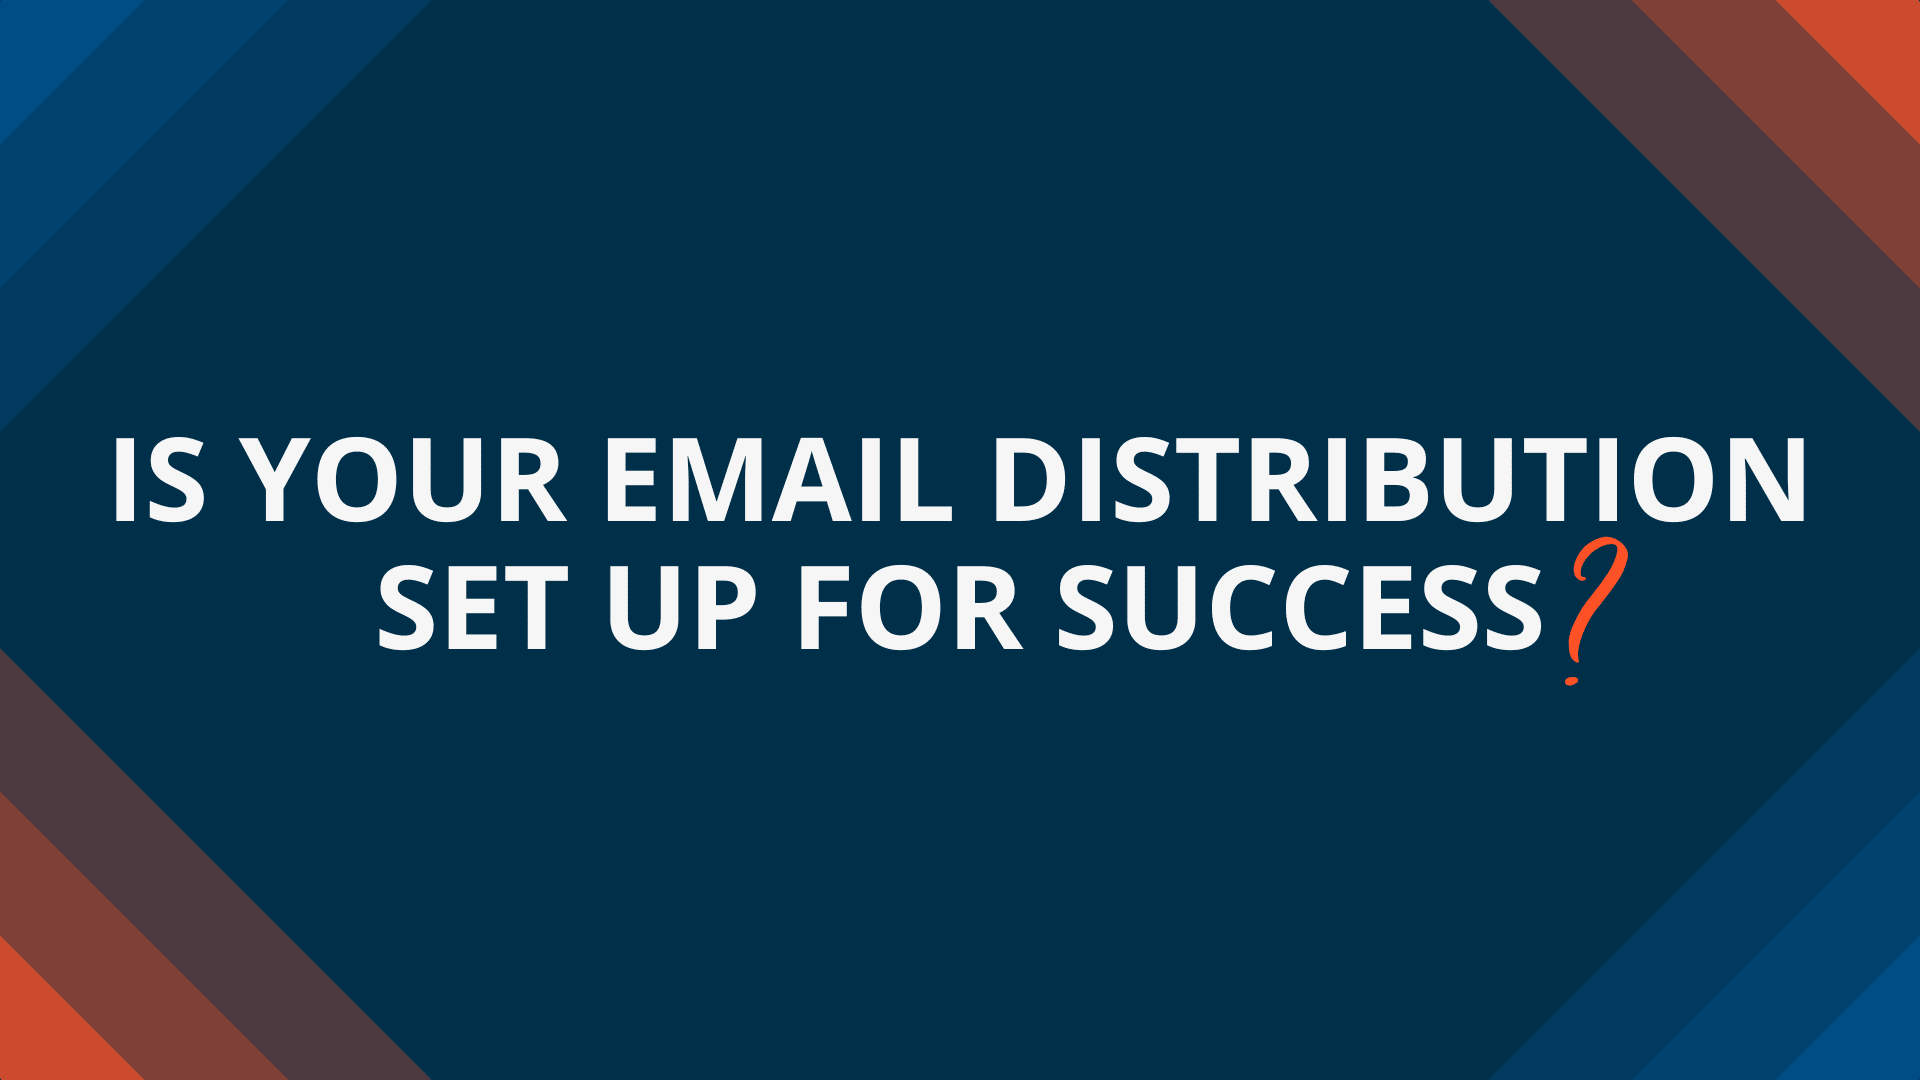 4 Tips for Optimizing Your Email Distributions